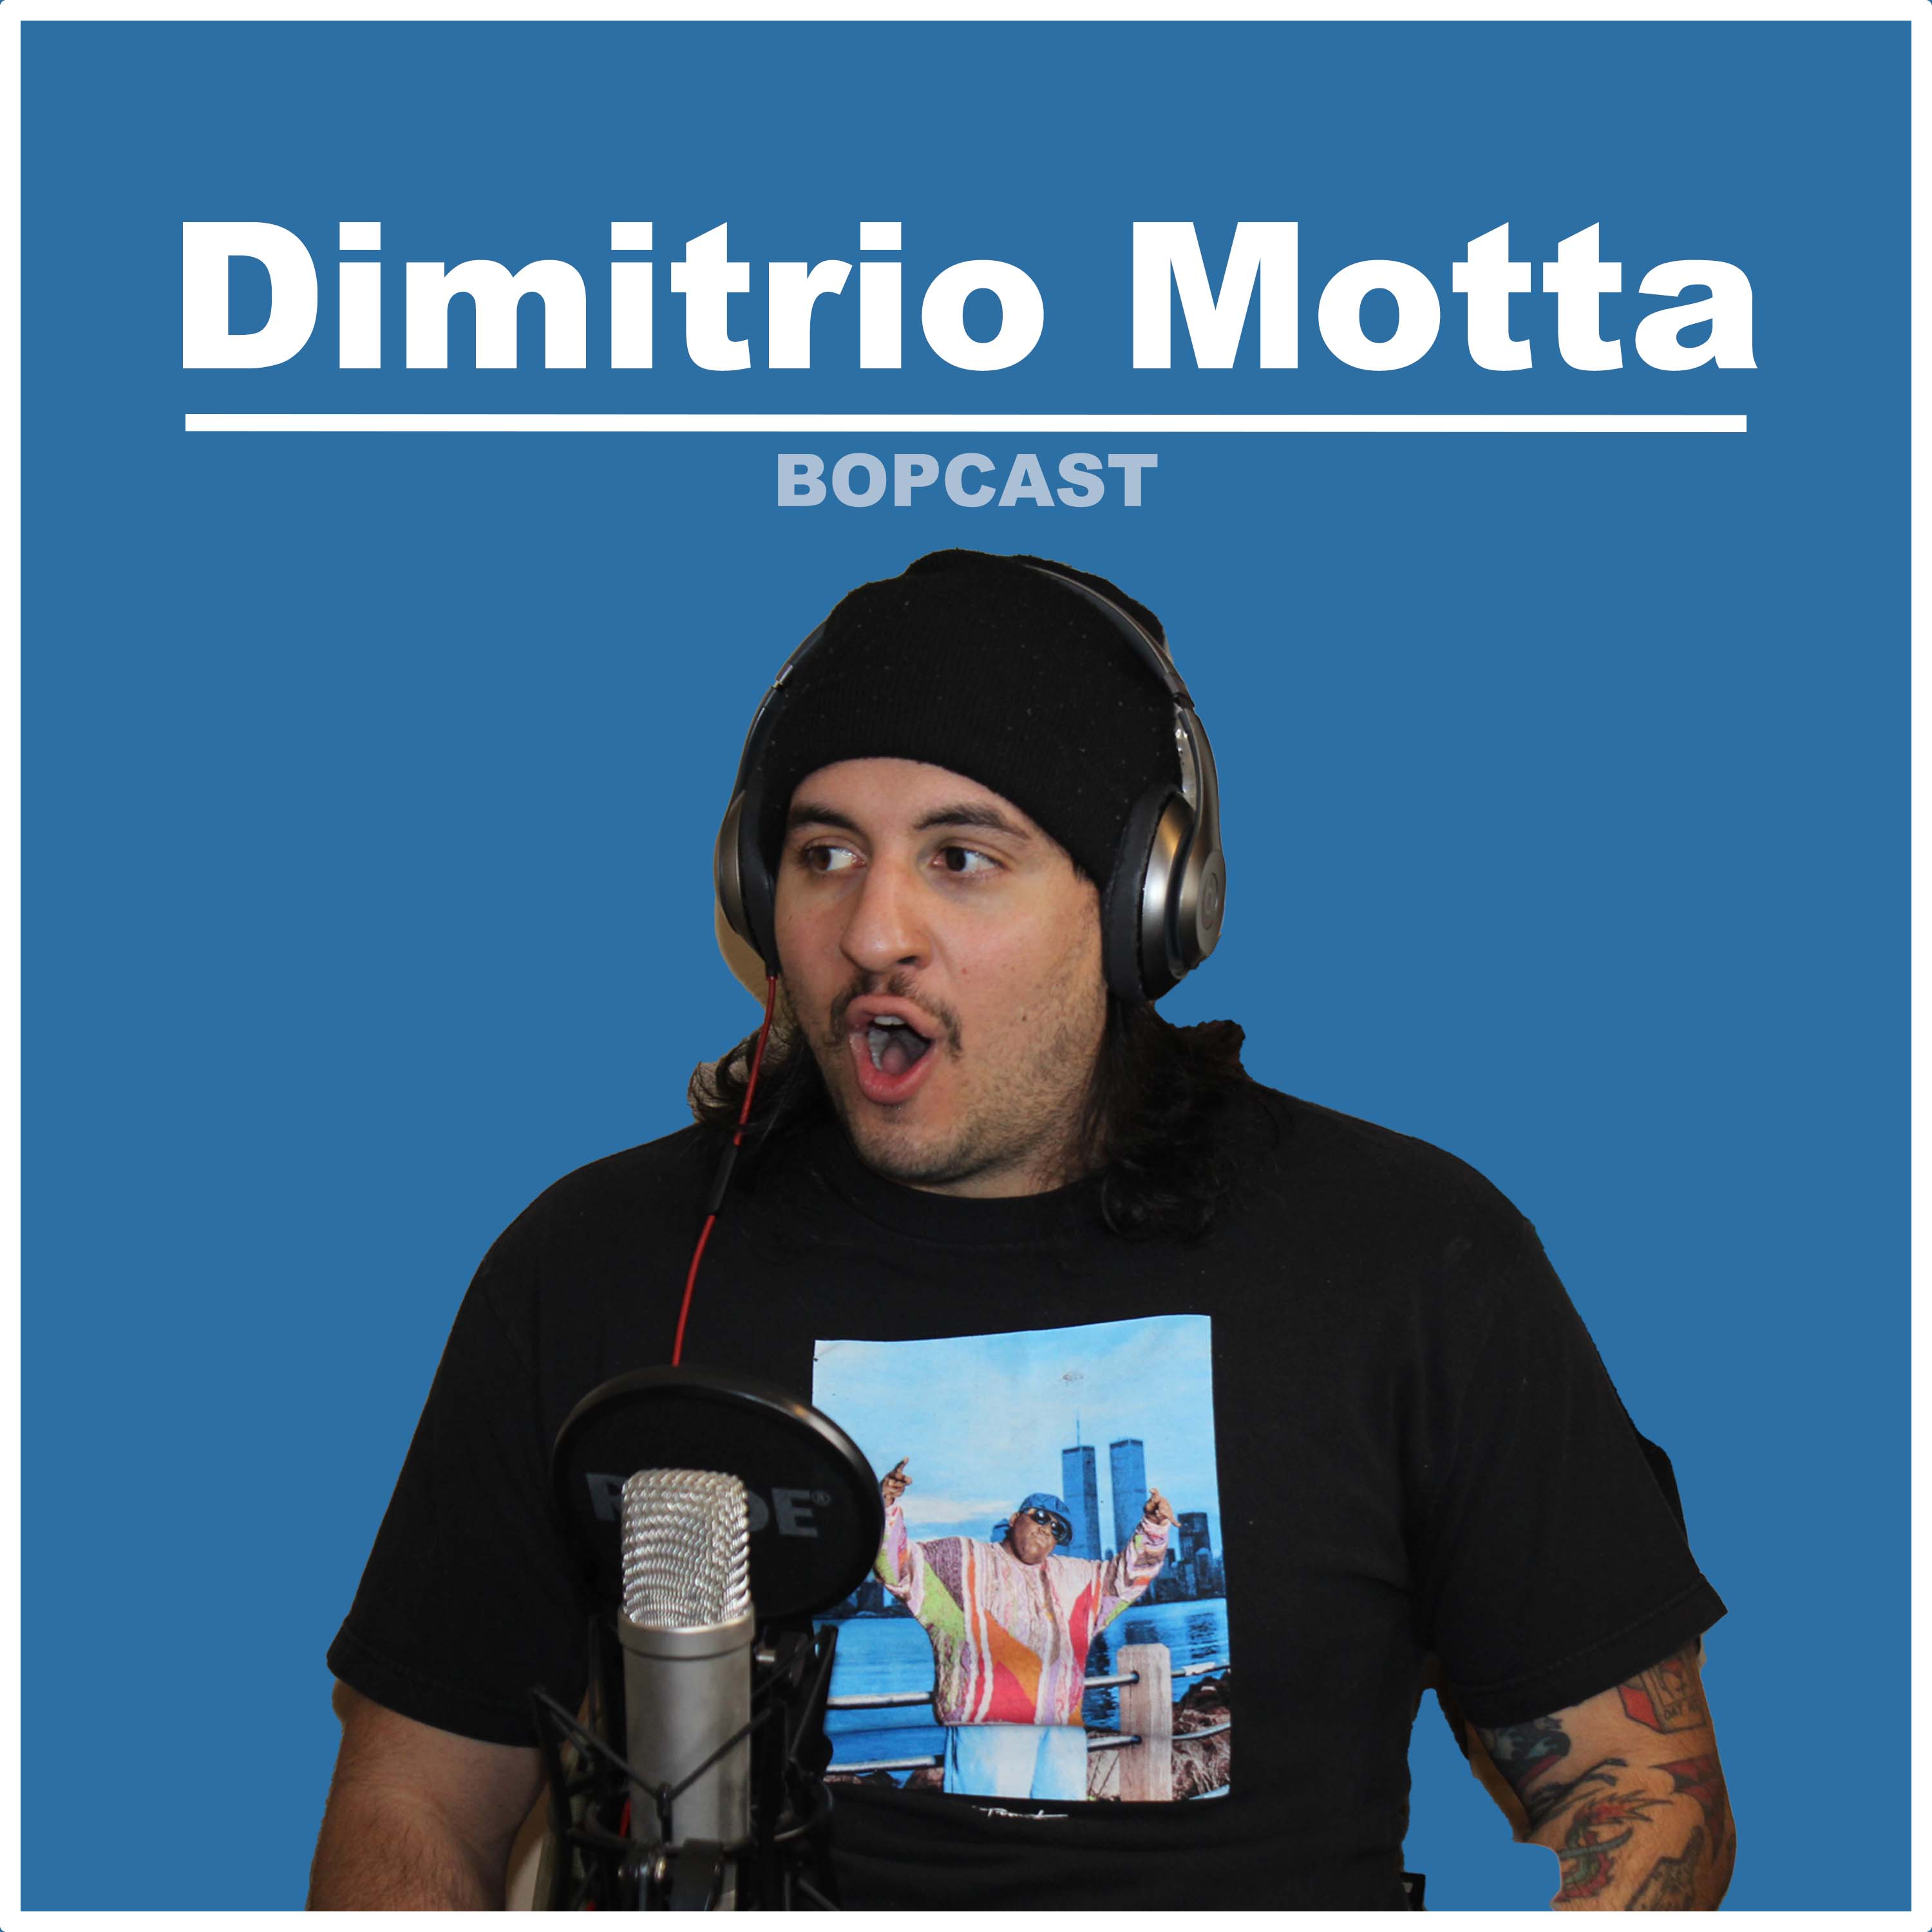 Demetrio Motta - Getting Banned from Virtual Open Mics, Hecklers Throwing Wine Glasses, and an Untraditional Journey into Standup Comedy